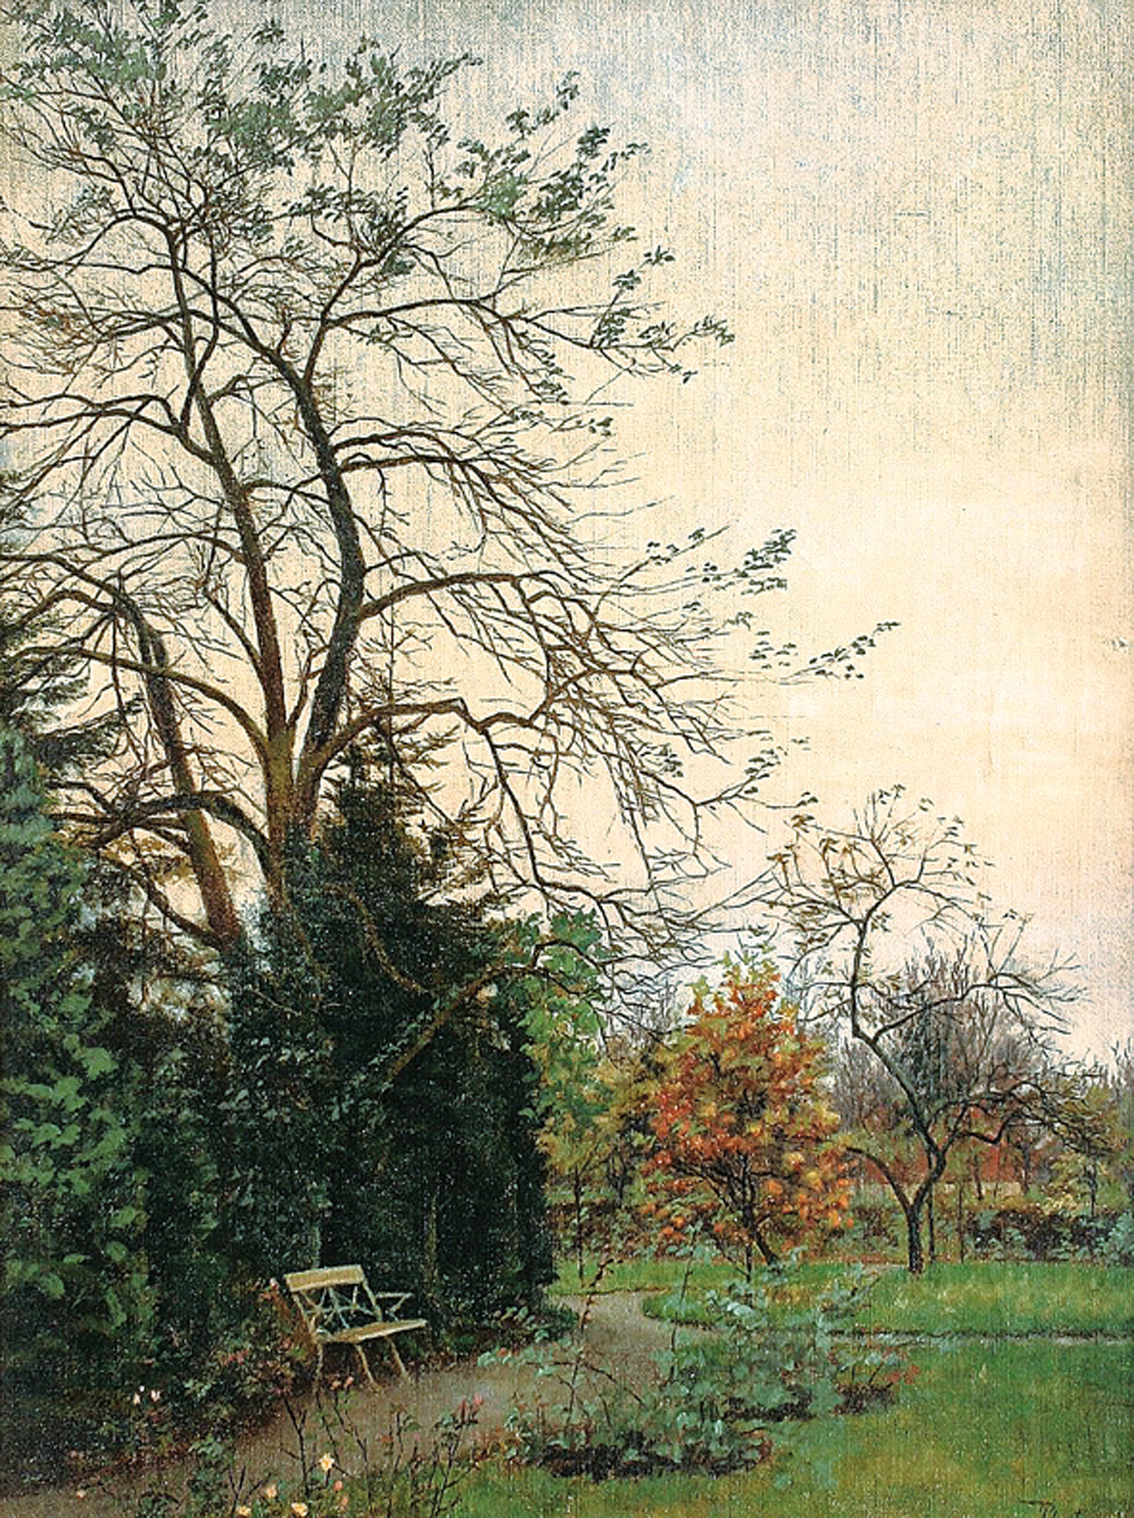 "A view on a garden and a white bench"